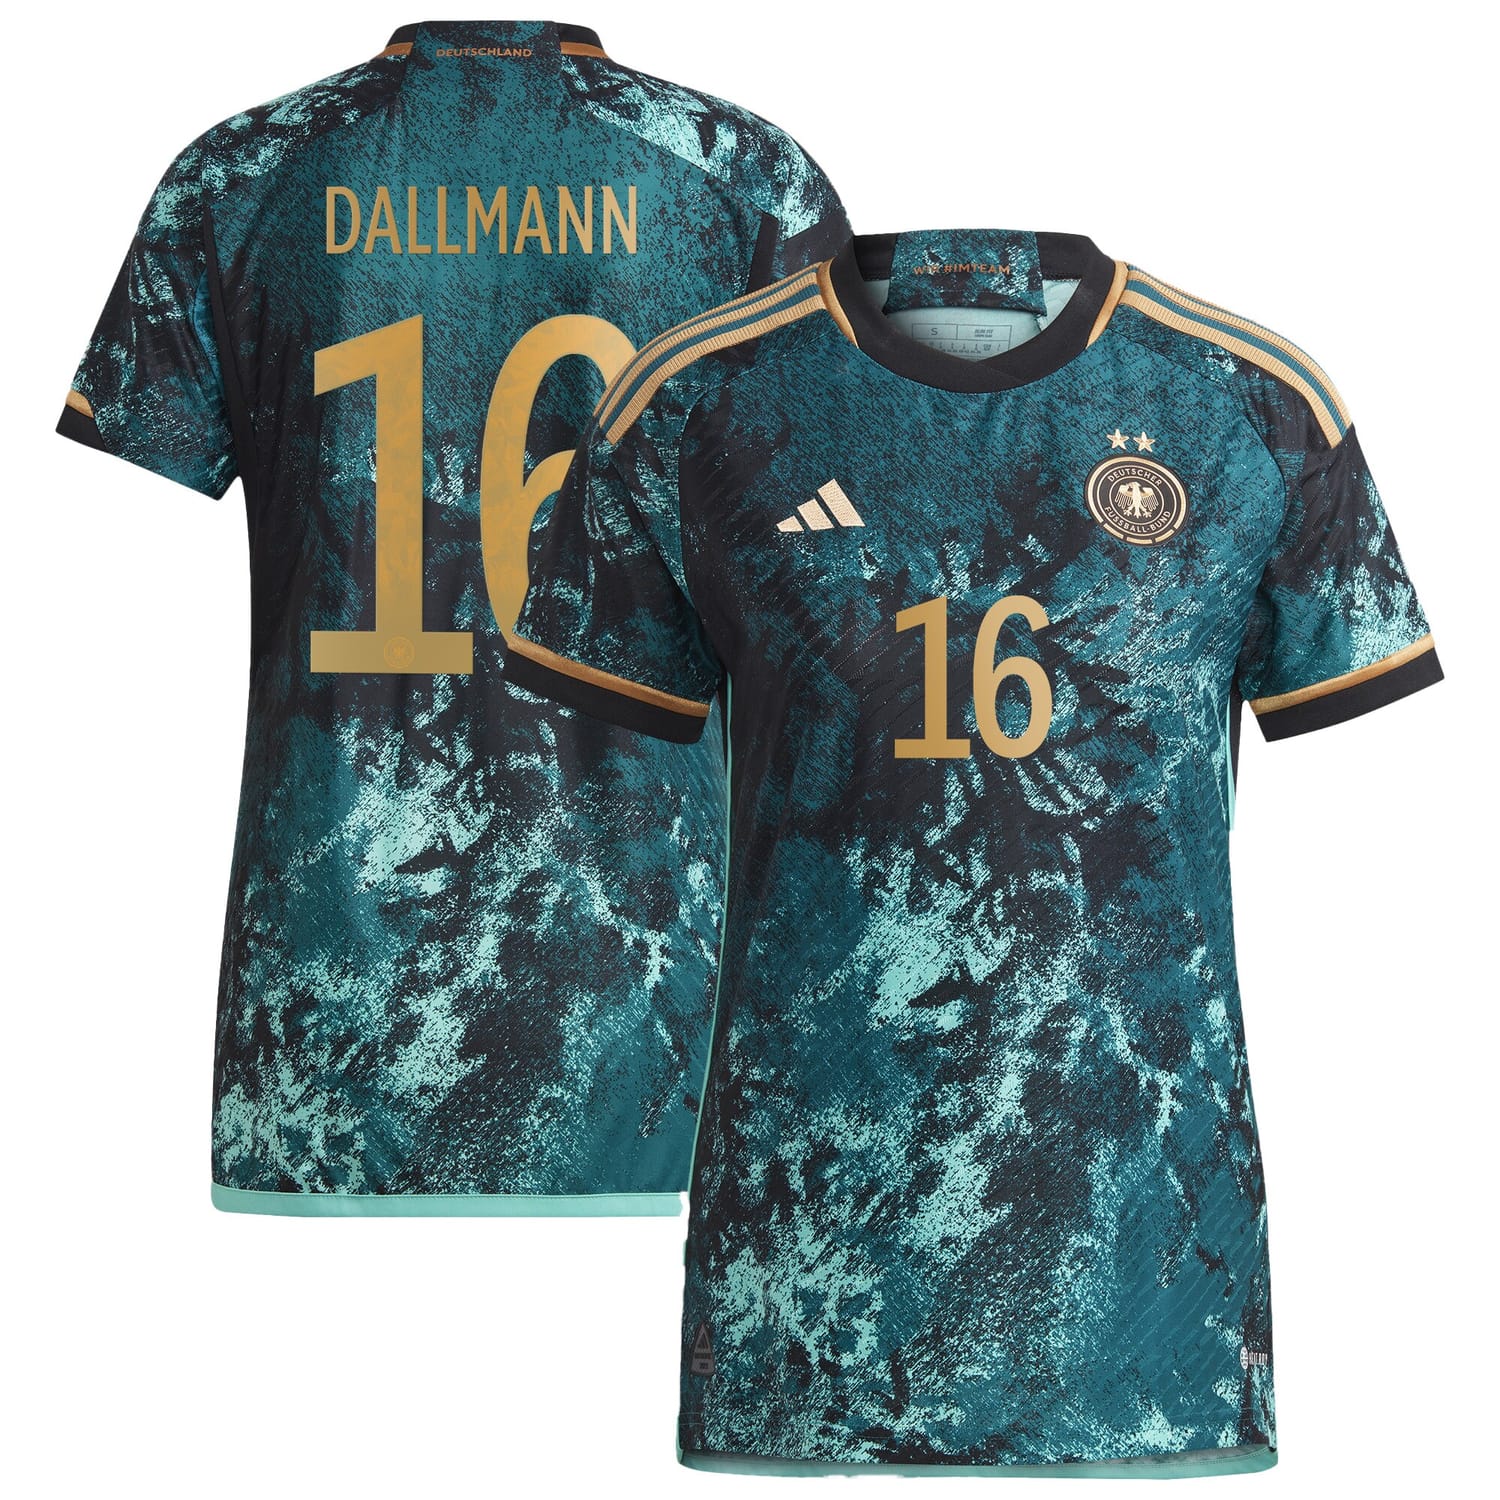 Germany National Team Away Authentic Jersey Shirt 2023 player Dallmann 16 printing for Women